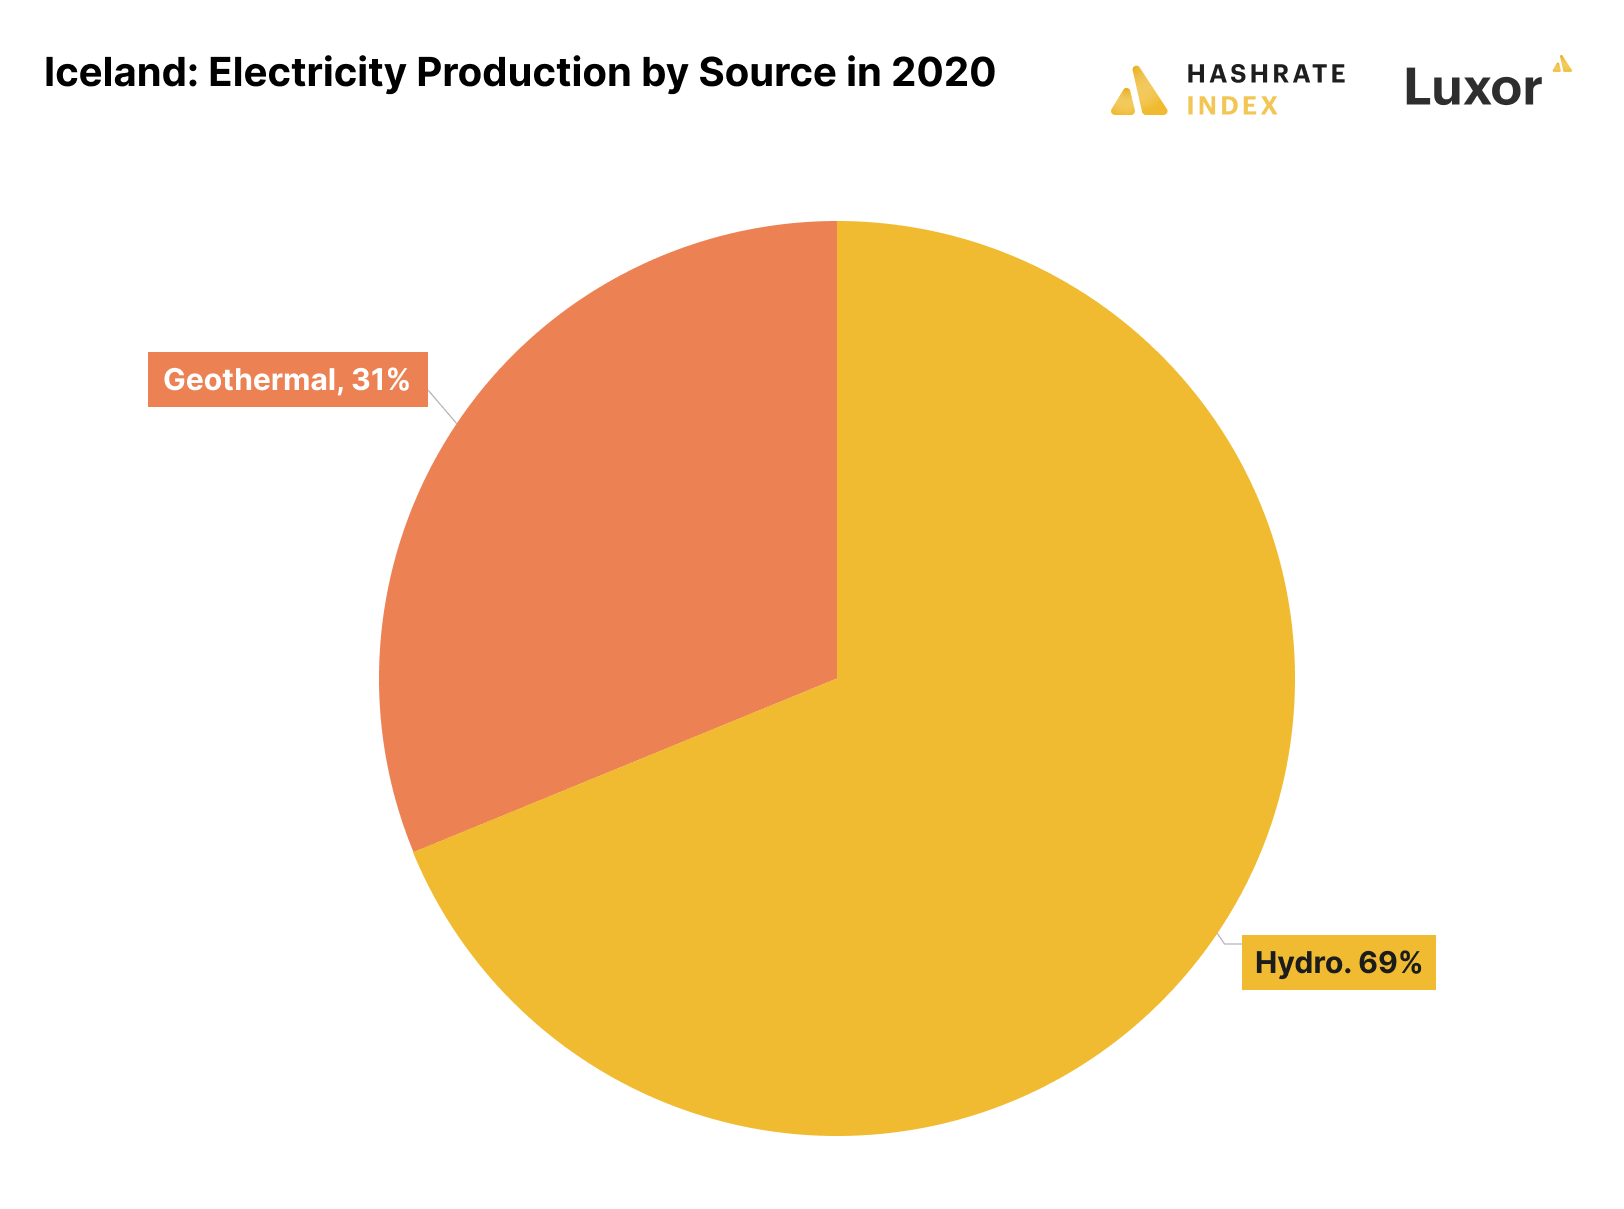 Iceland: Electricity Production by Source in 2020